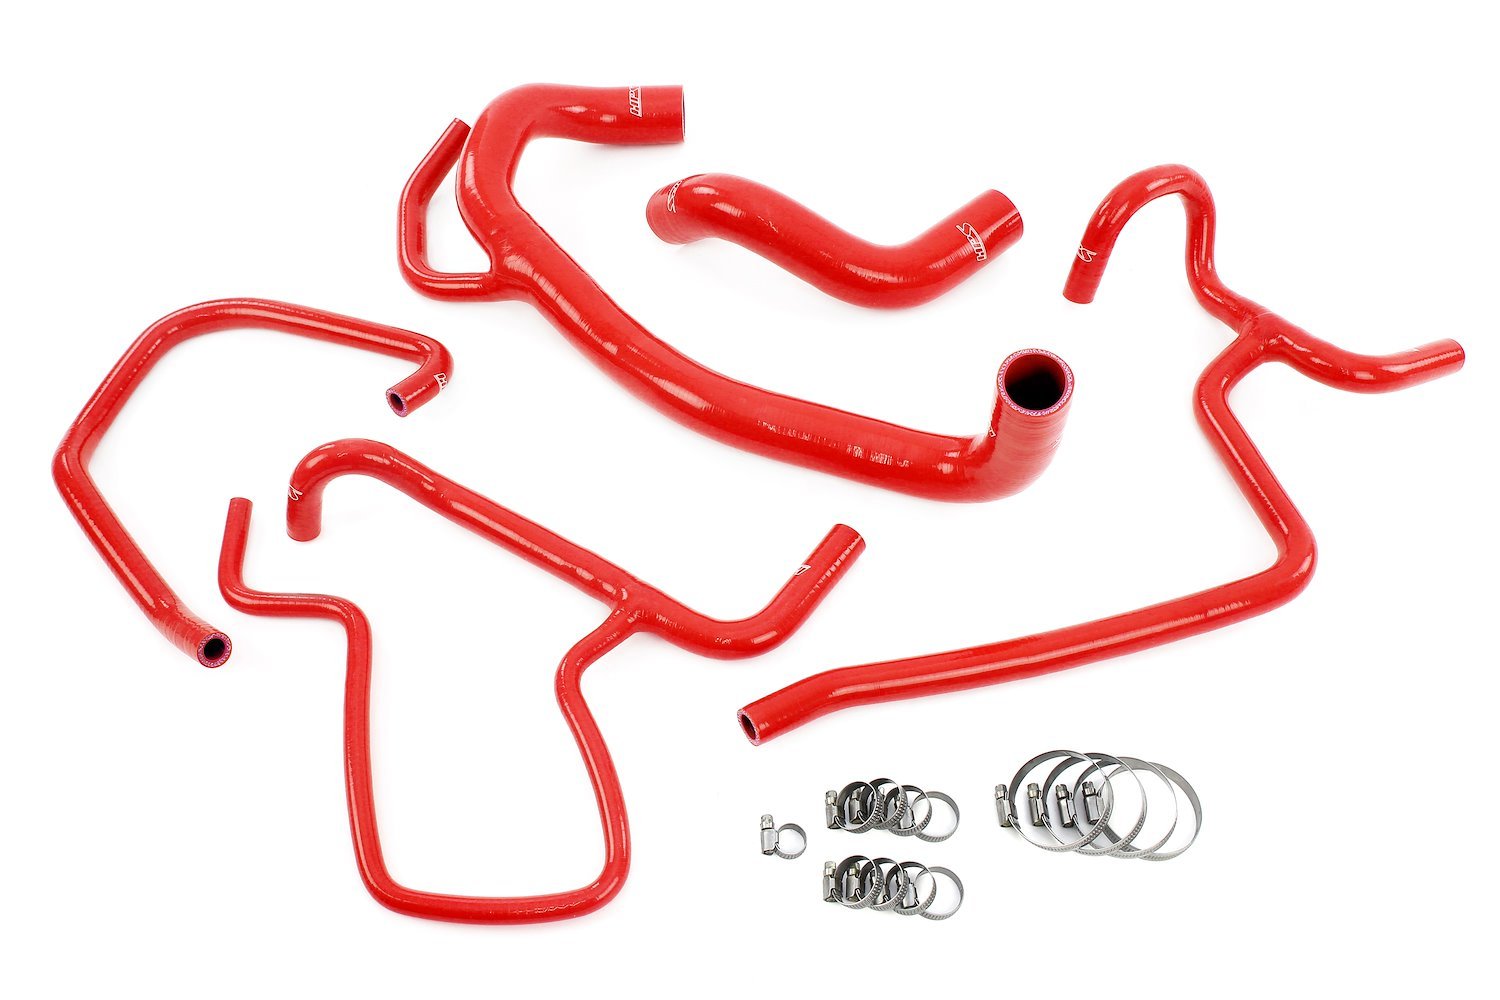 57-1616-RED Radiator and Heater Hose Kit, 3-Ply Reinforced Silicone, Replaces Rubber Radiator & Heater Coolant Hoses